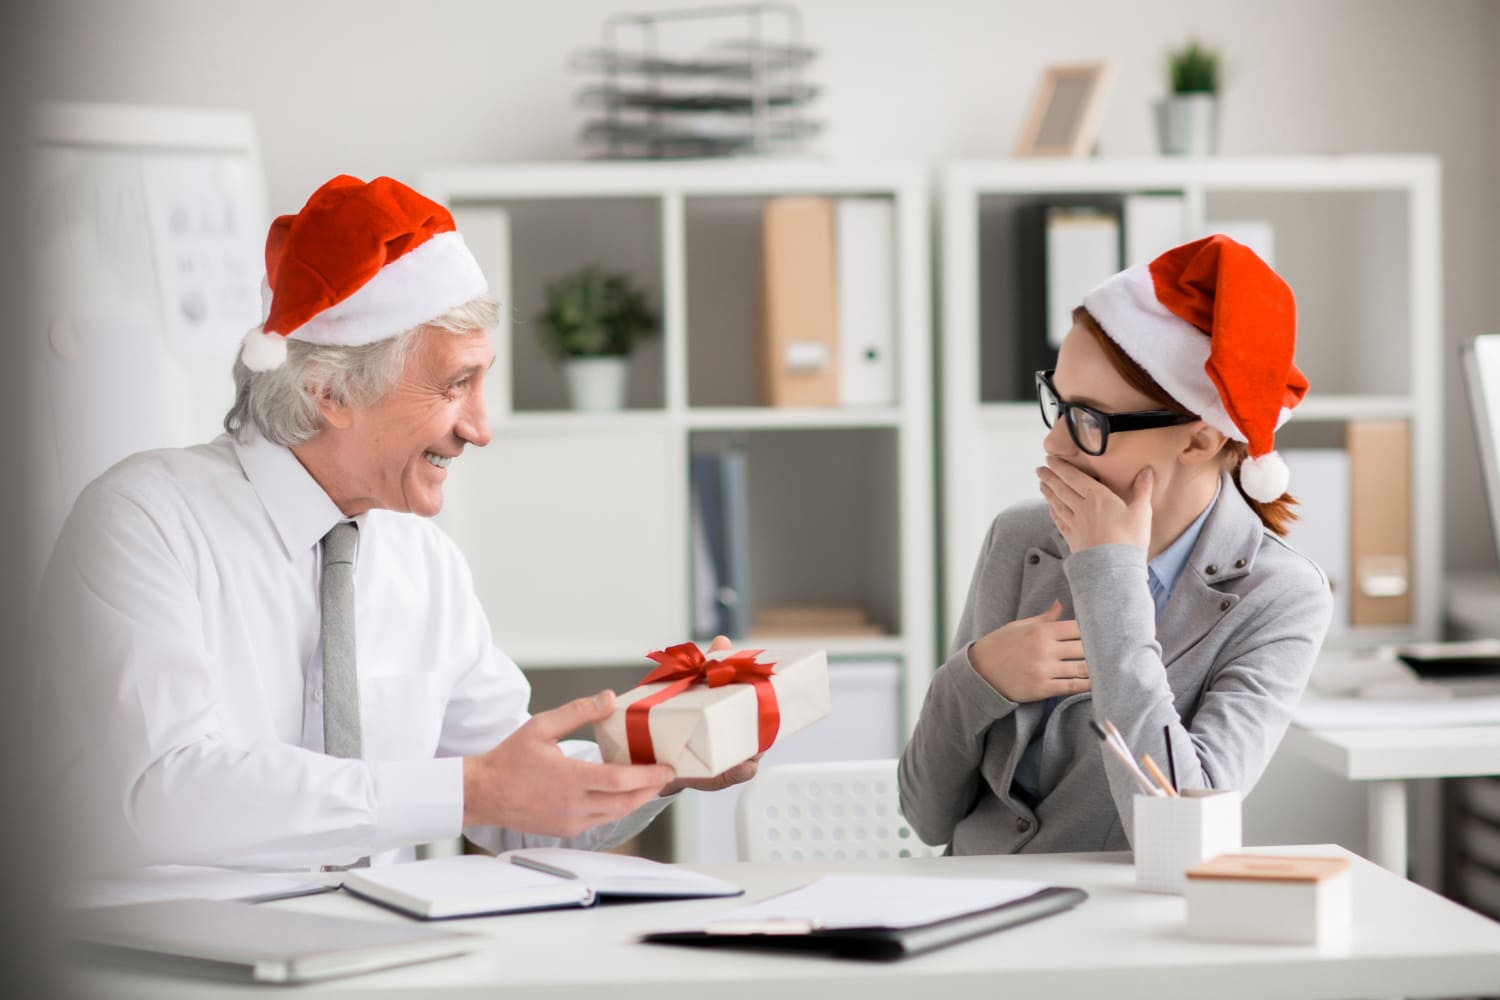 5 Best Bulk Christmas Gifts For Employees